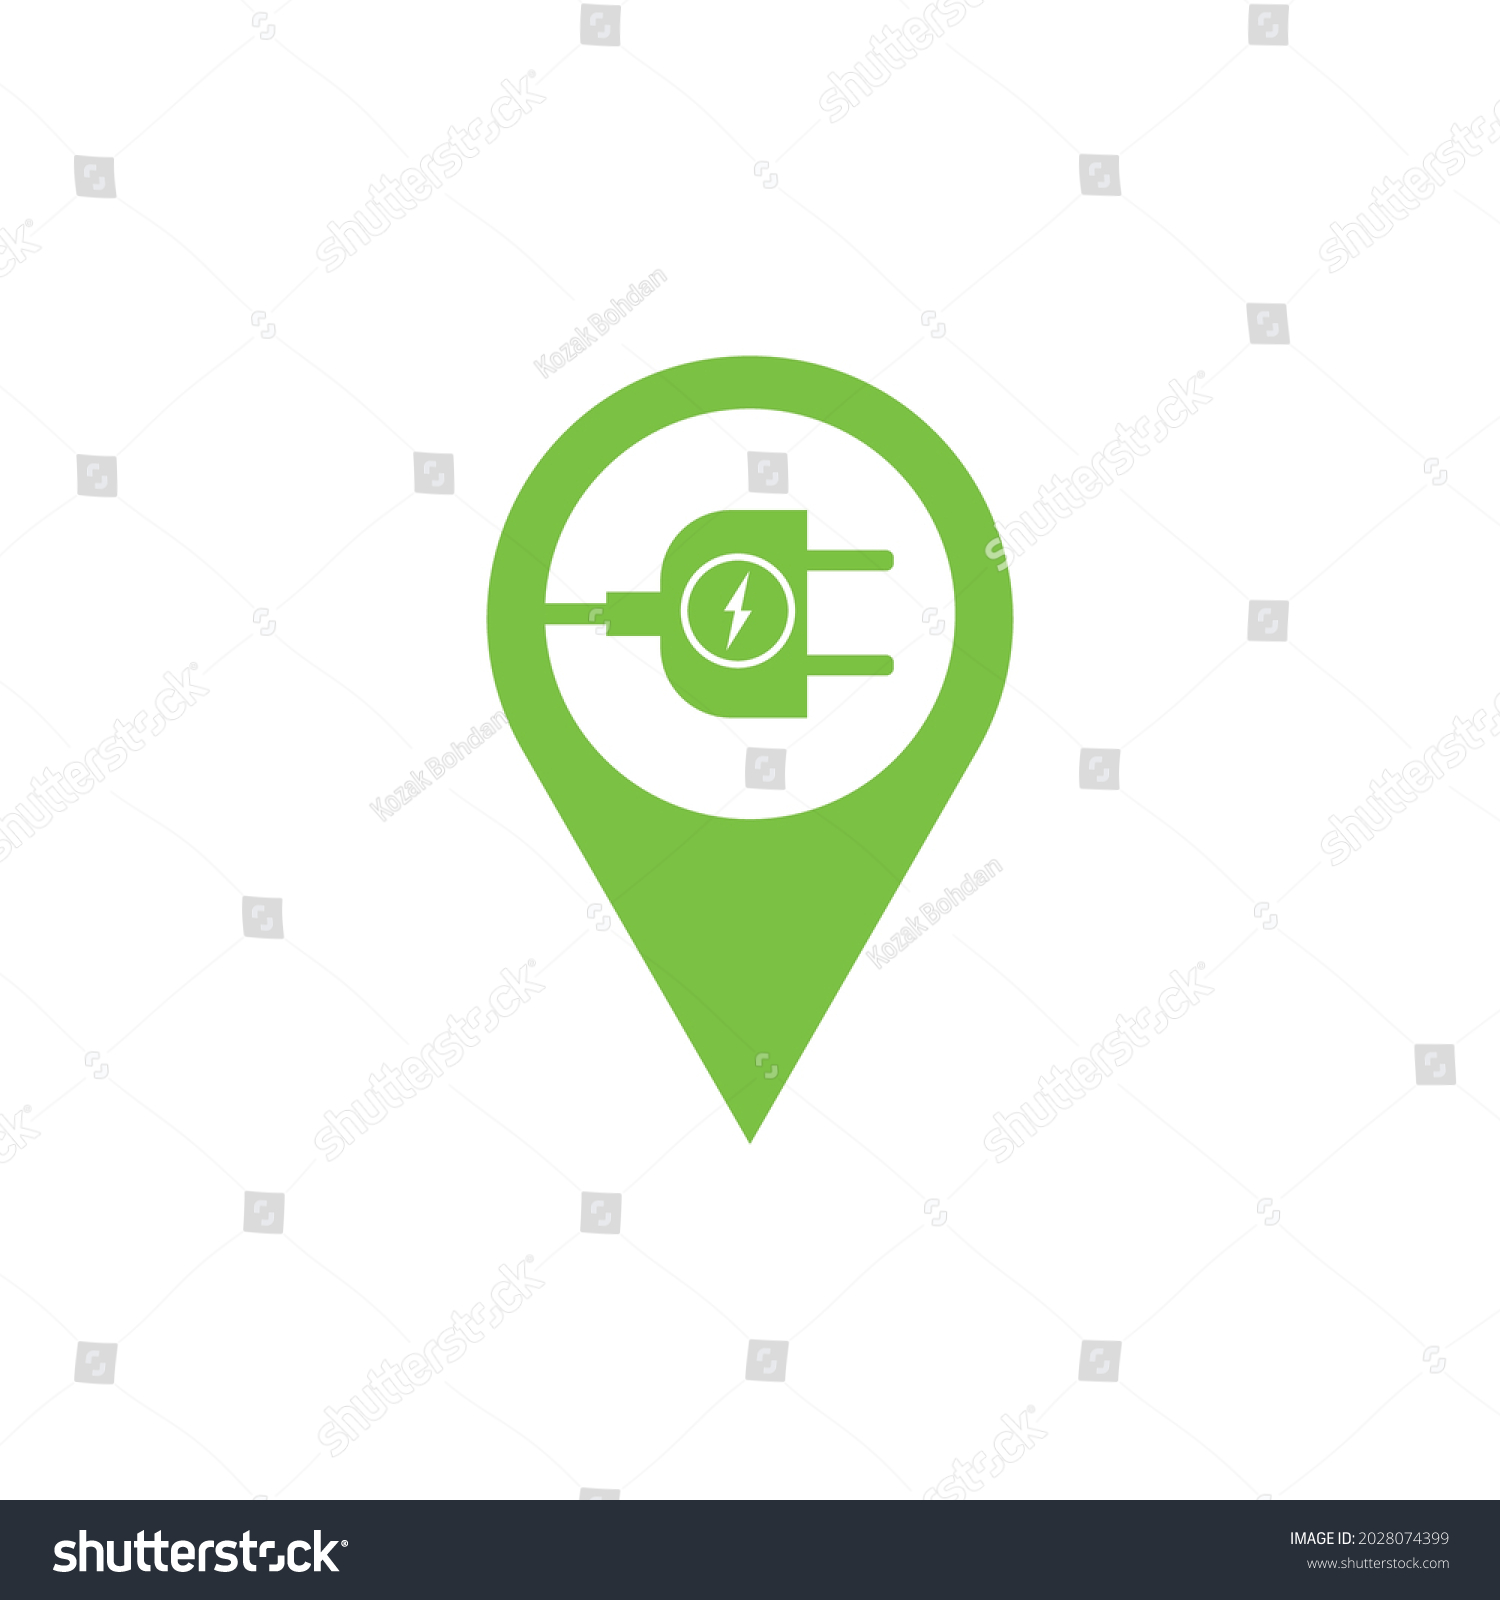 SVG of Green location and electric charging icon. Concept of electric car charging stations. Can be used as an emblem. Nature conservation. Rational use of resources. Vector image. svg